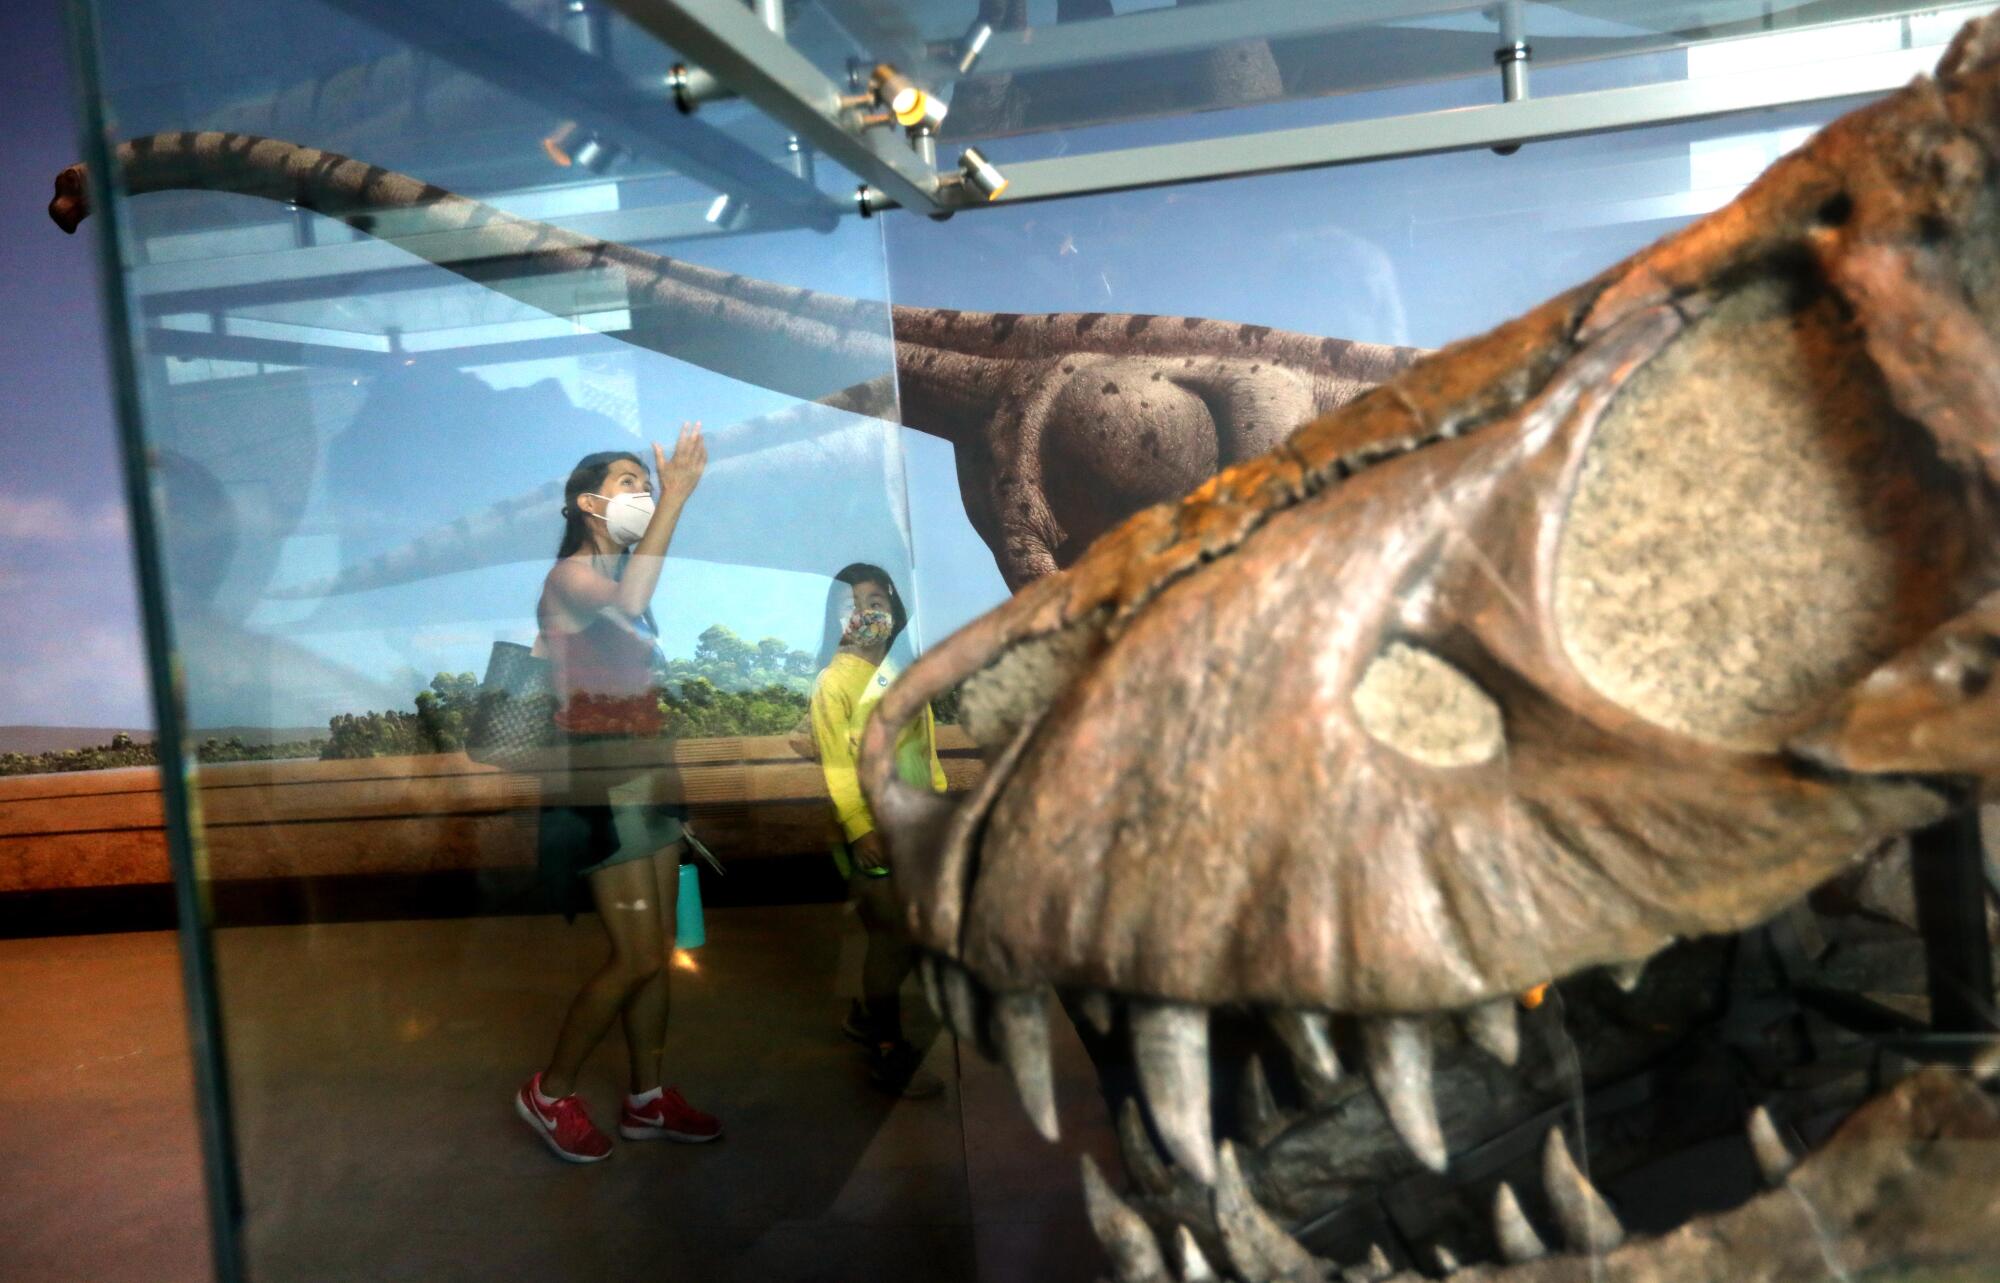 A woman and child are seen through the glass of a case that holds a massive dinosaur head with sharp teeth.